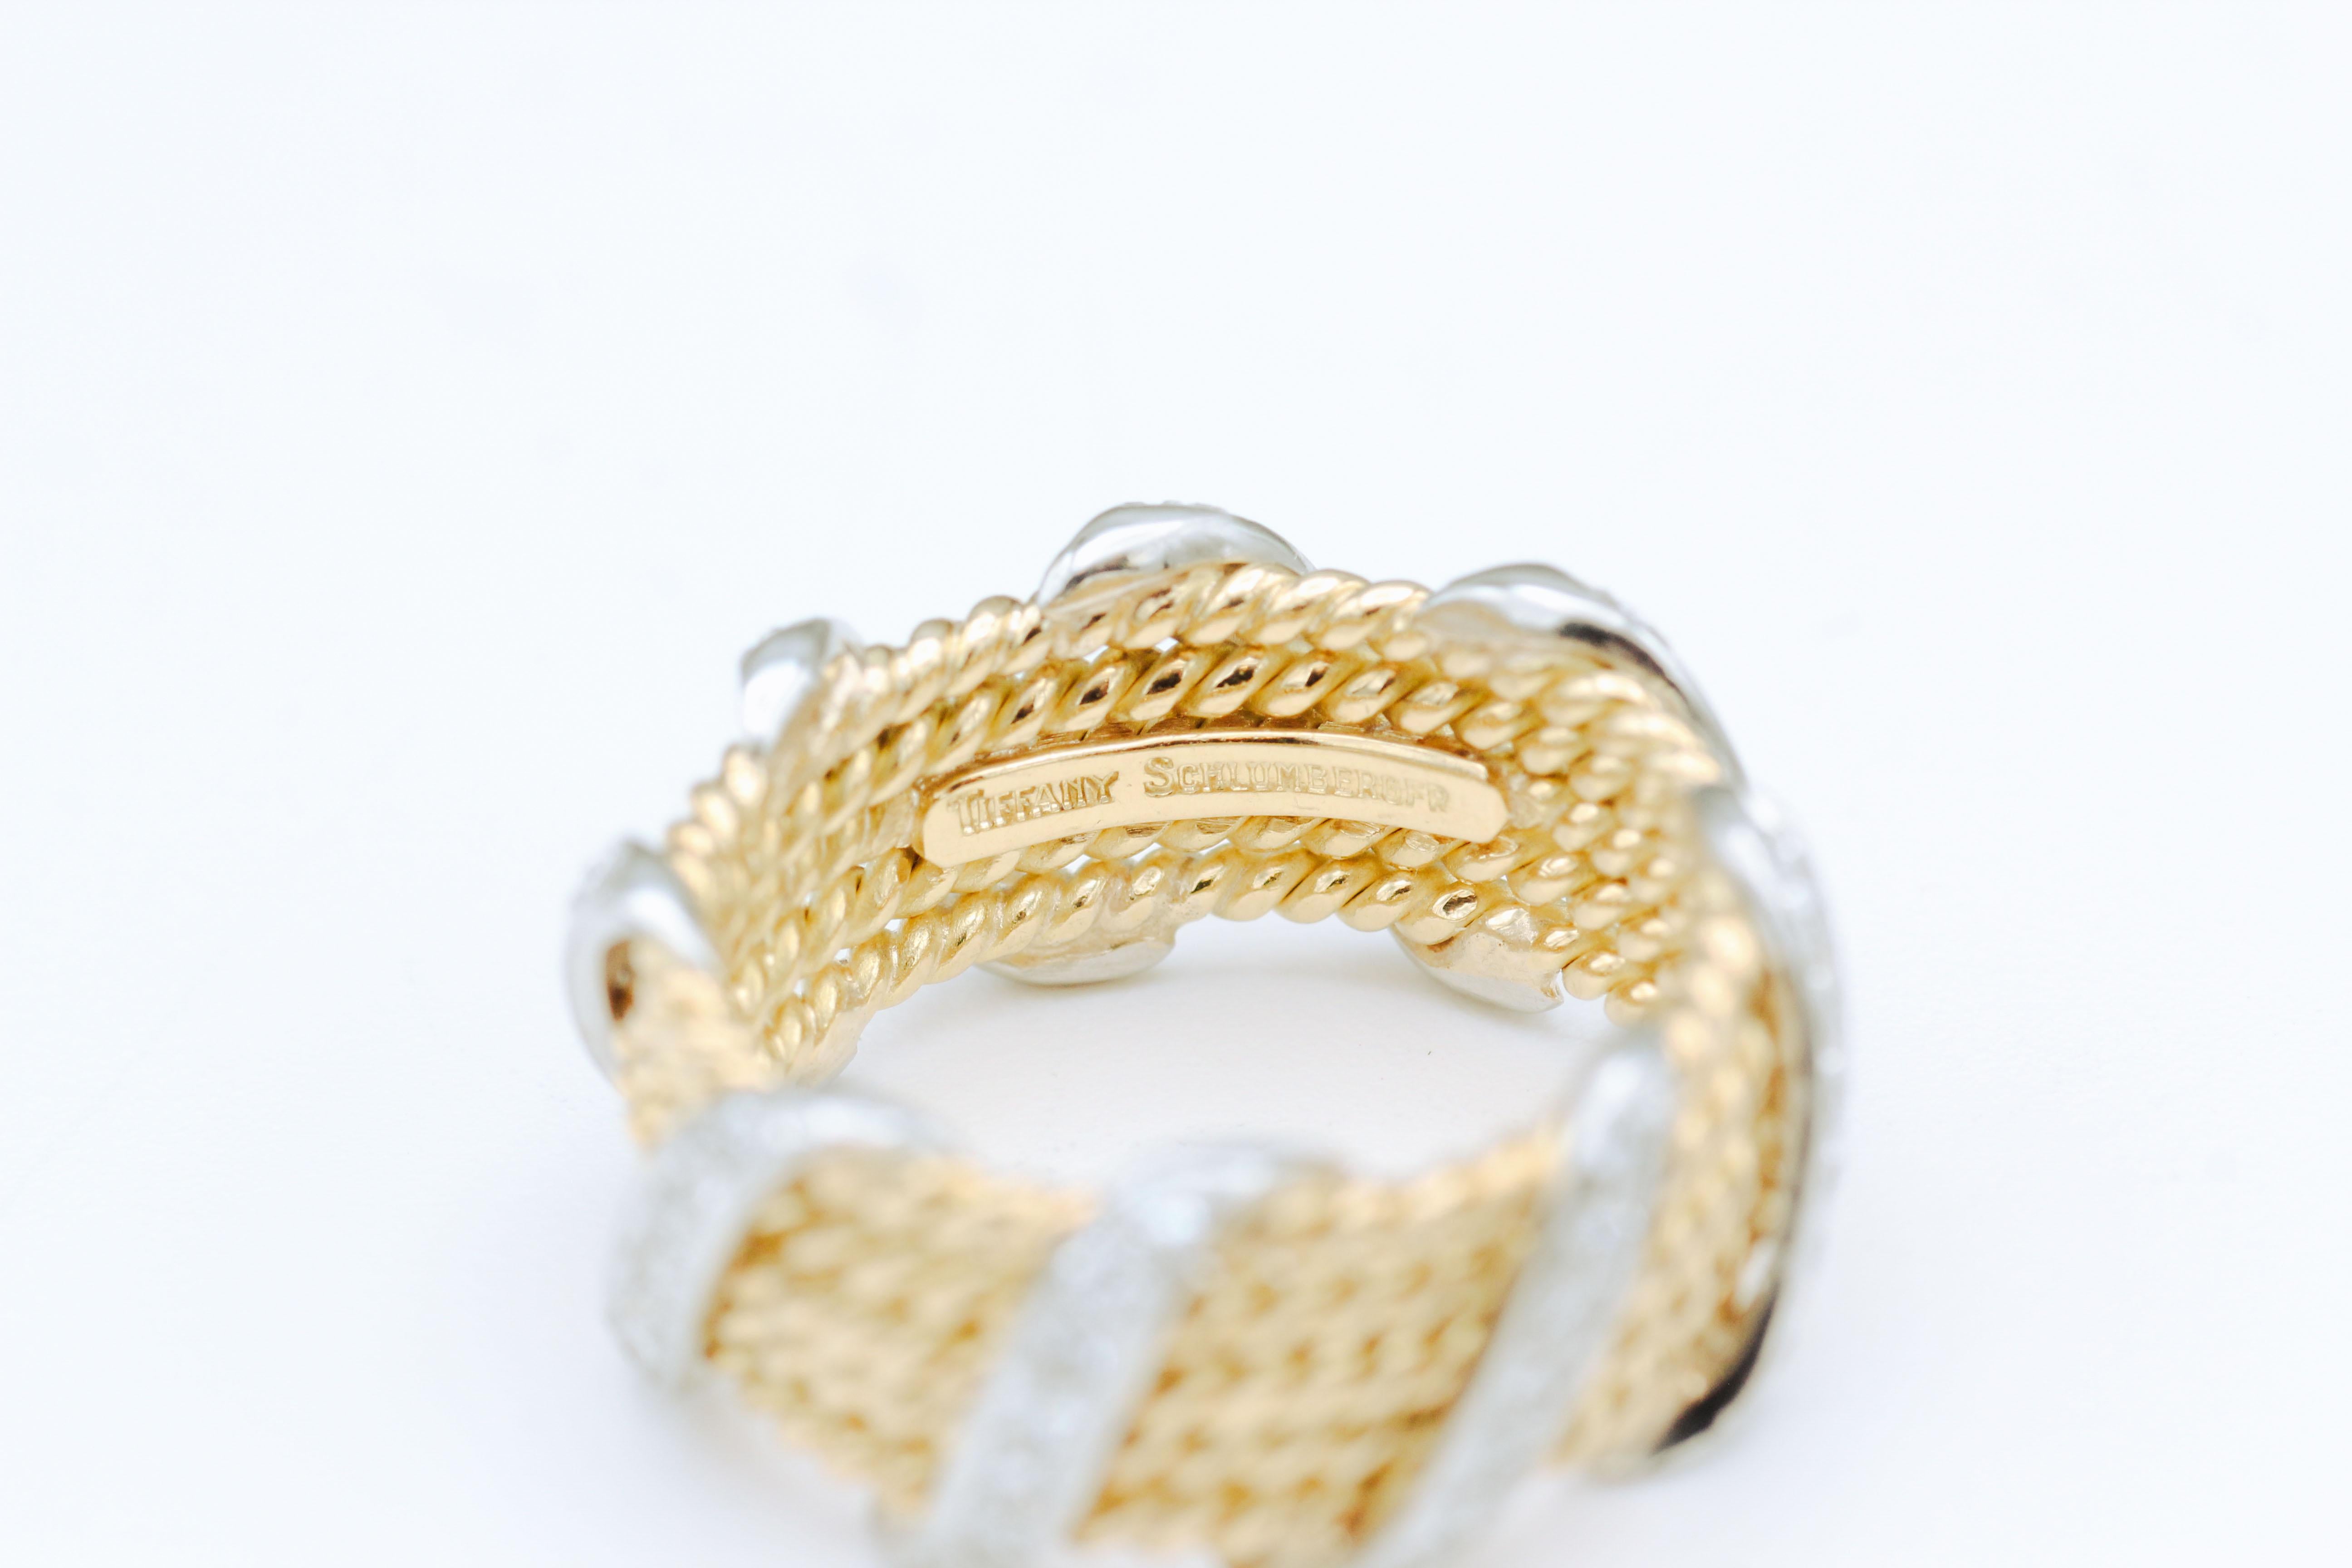 Fine platinum and 18K yellow gold diamond  band by Tiffany & Co., Schlumberger.  The band has five rows and features high quality brilliant cut diamonds.  Approx. size 7. 

Hallmarks: Tiffany & Co., Schlumberger.